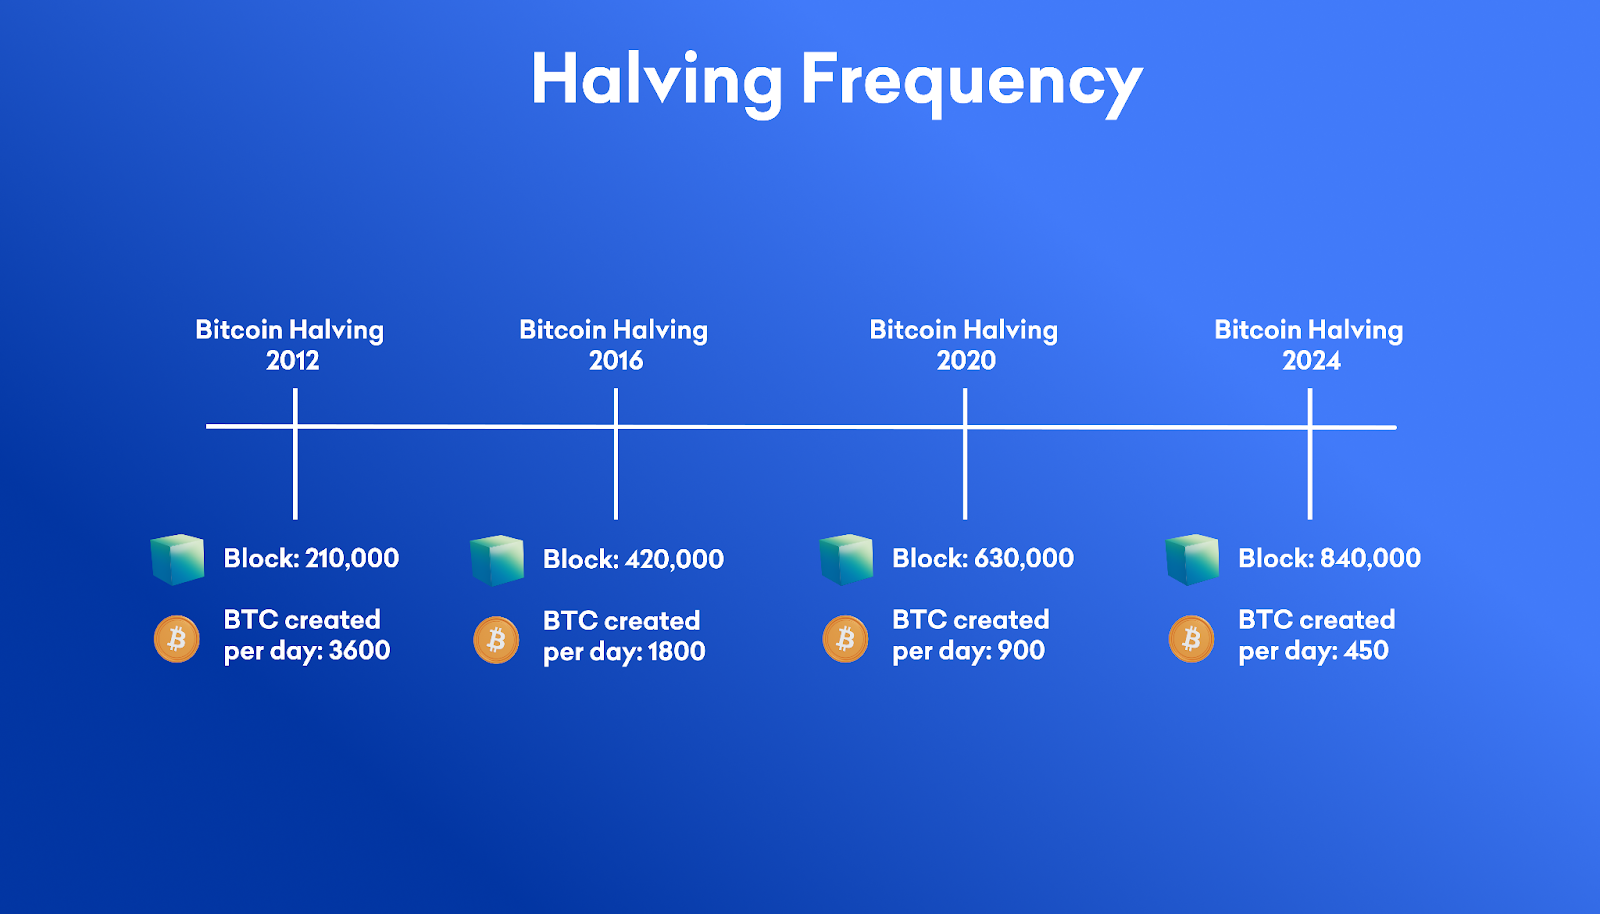 Bitcoin Halving: The Numbers That Matter